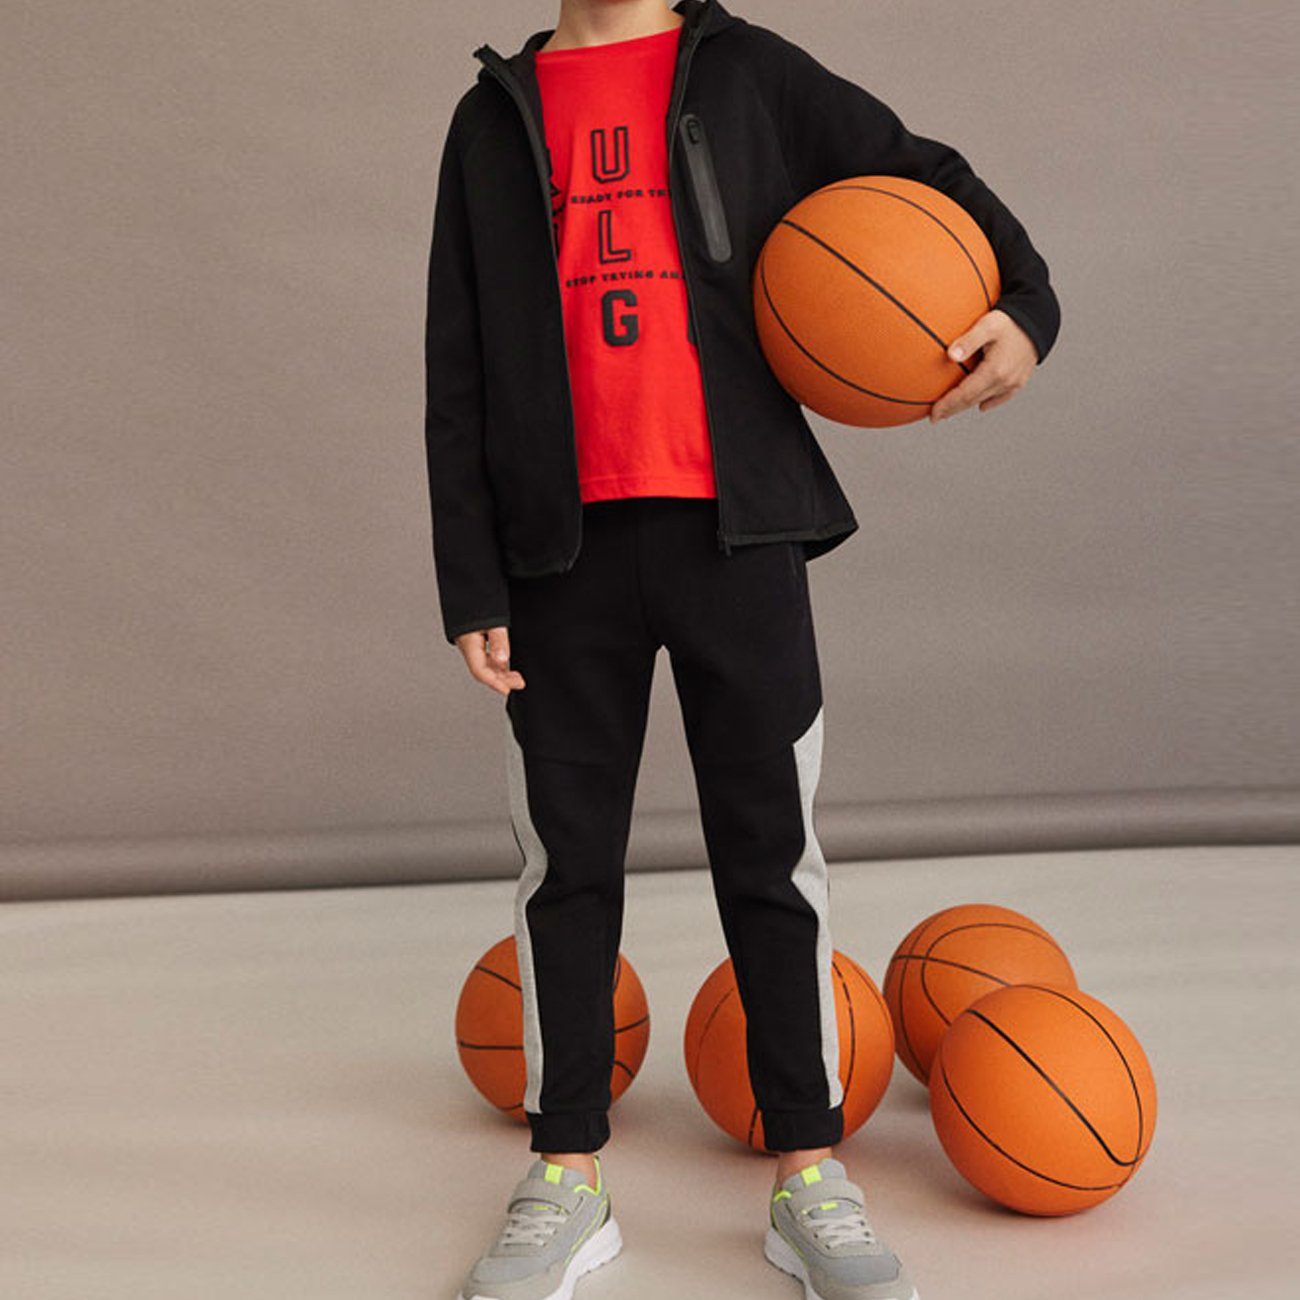 Exclusive Black Hooded Sport jacket For Boys (21969)